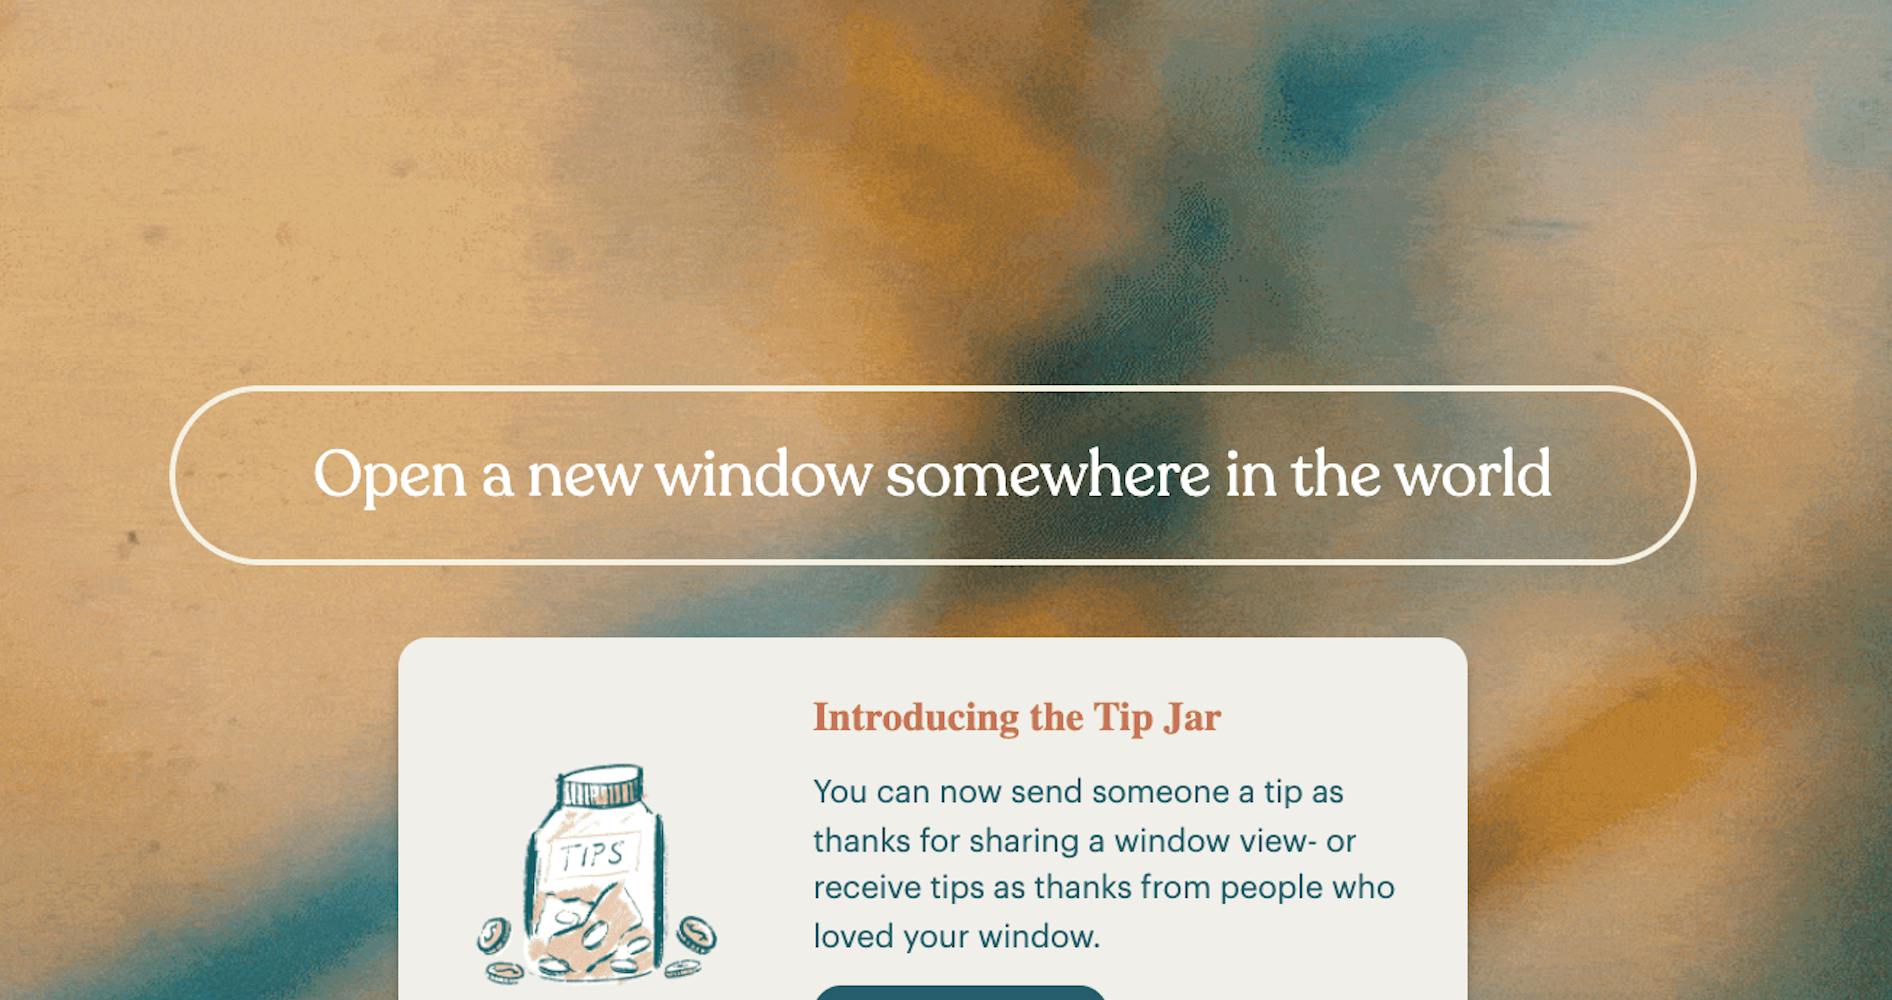 Text: Open a new window somewhere in the world. Introducing the Tip Jar. You can now send someone a tip as thanks for sharing a window view - or receive tips as thanks from people who loved your window.